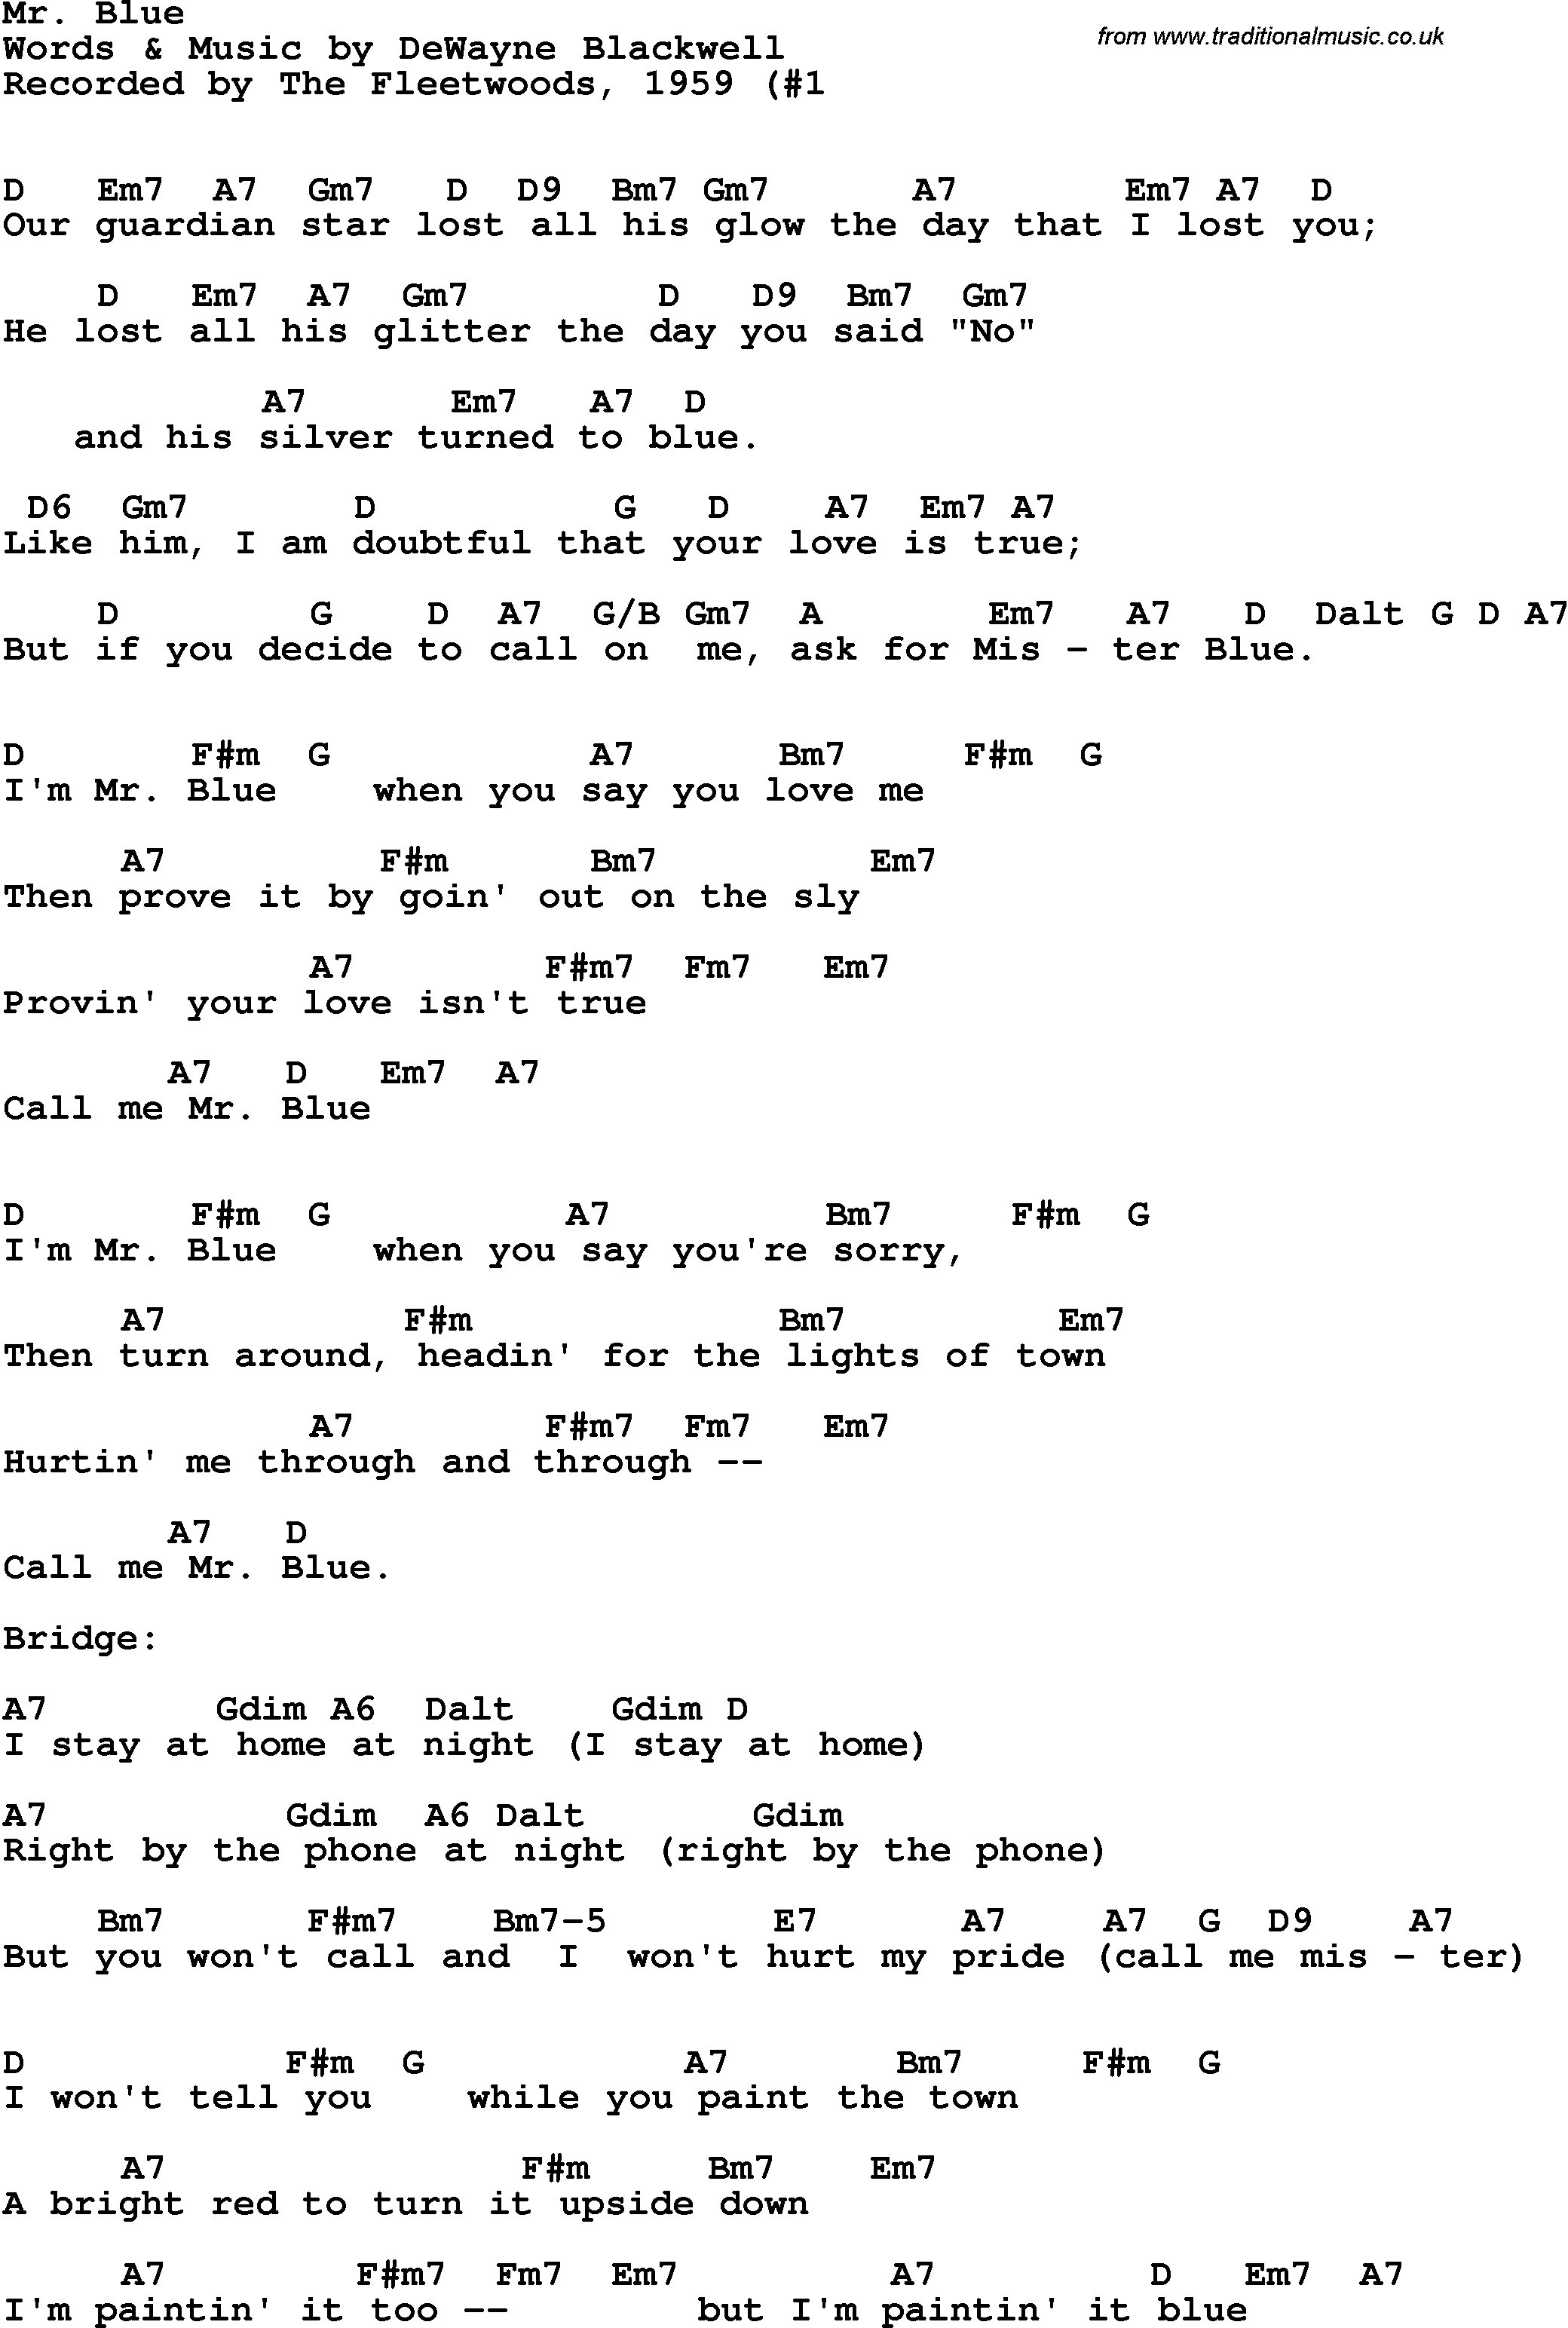 Song Lyrics with guitar chords for Mr Blue - The Fleetwoods, 1959